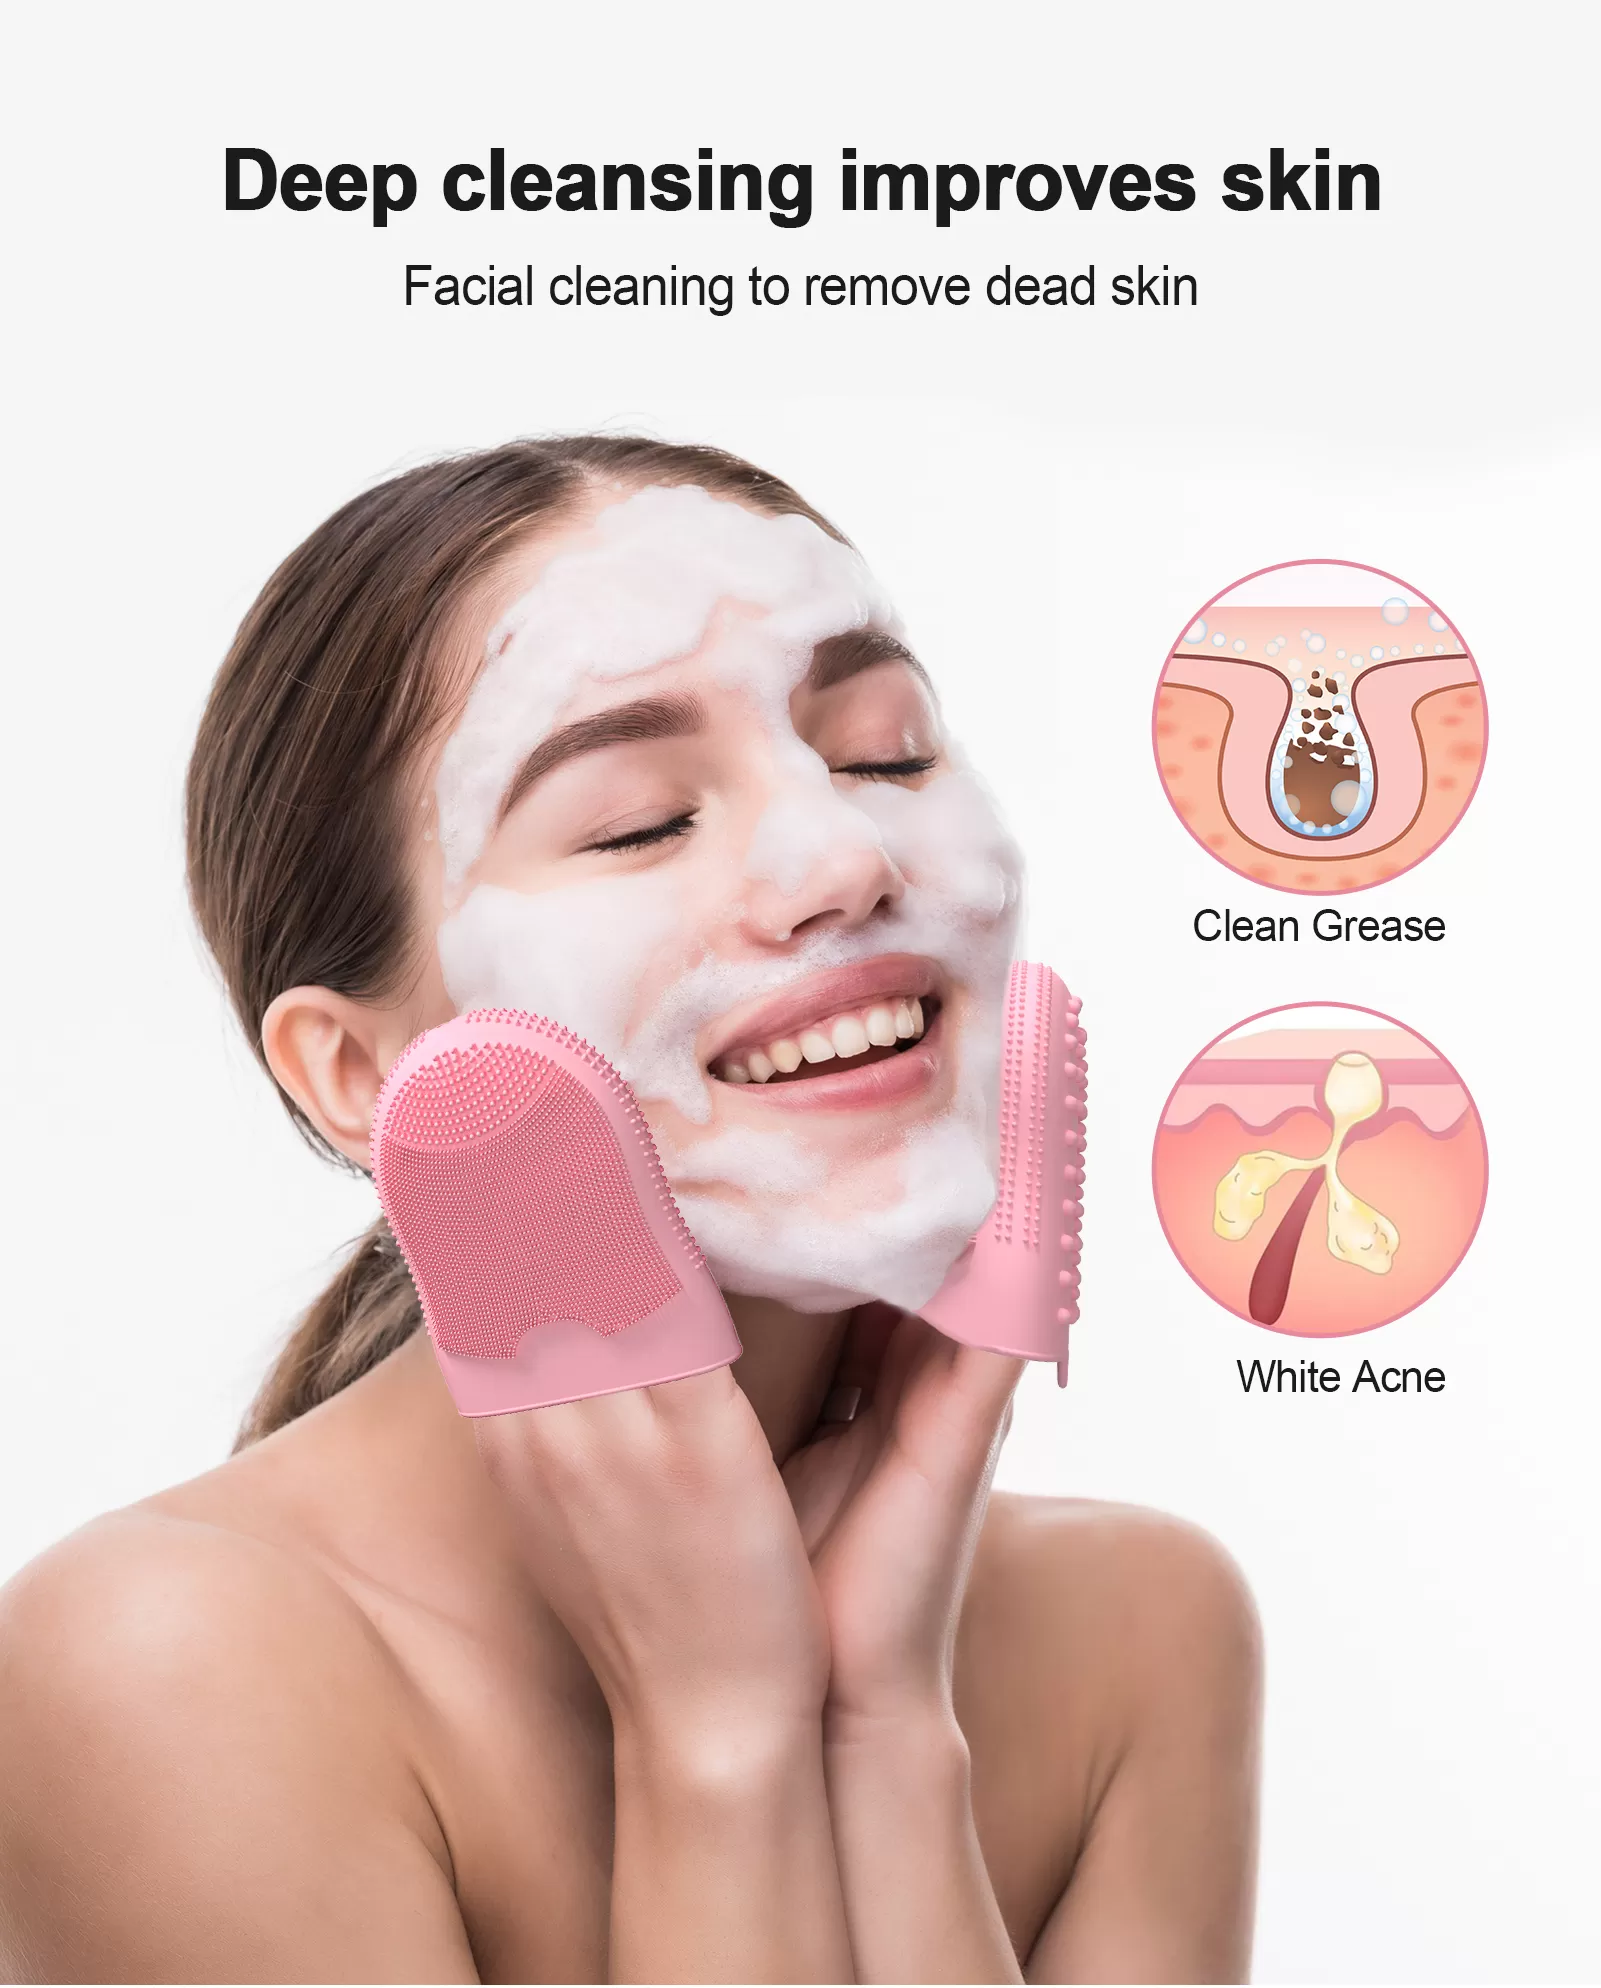 Silicone customized beauty personal care